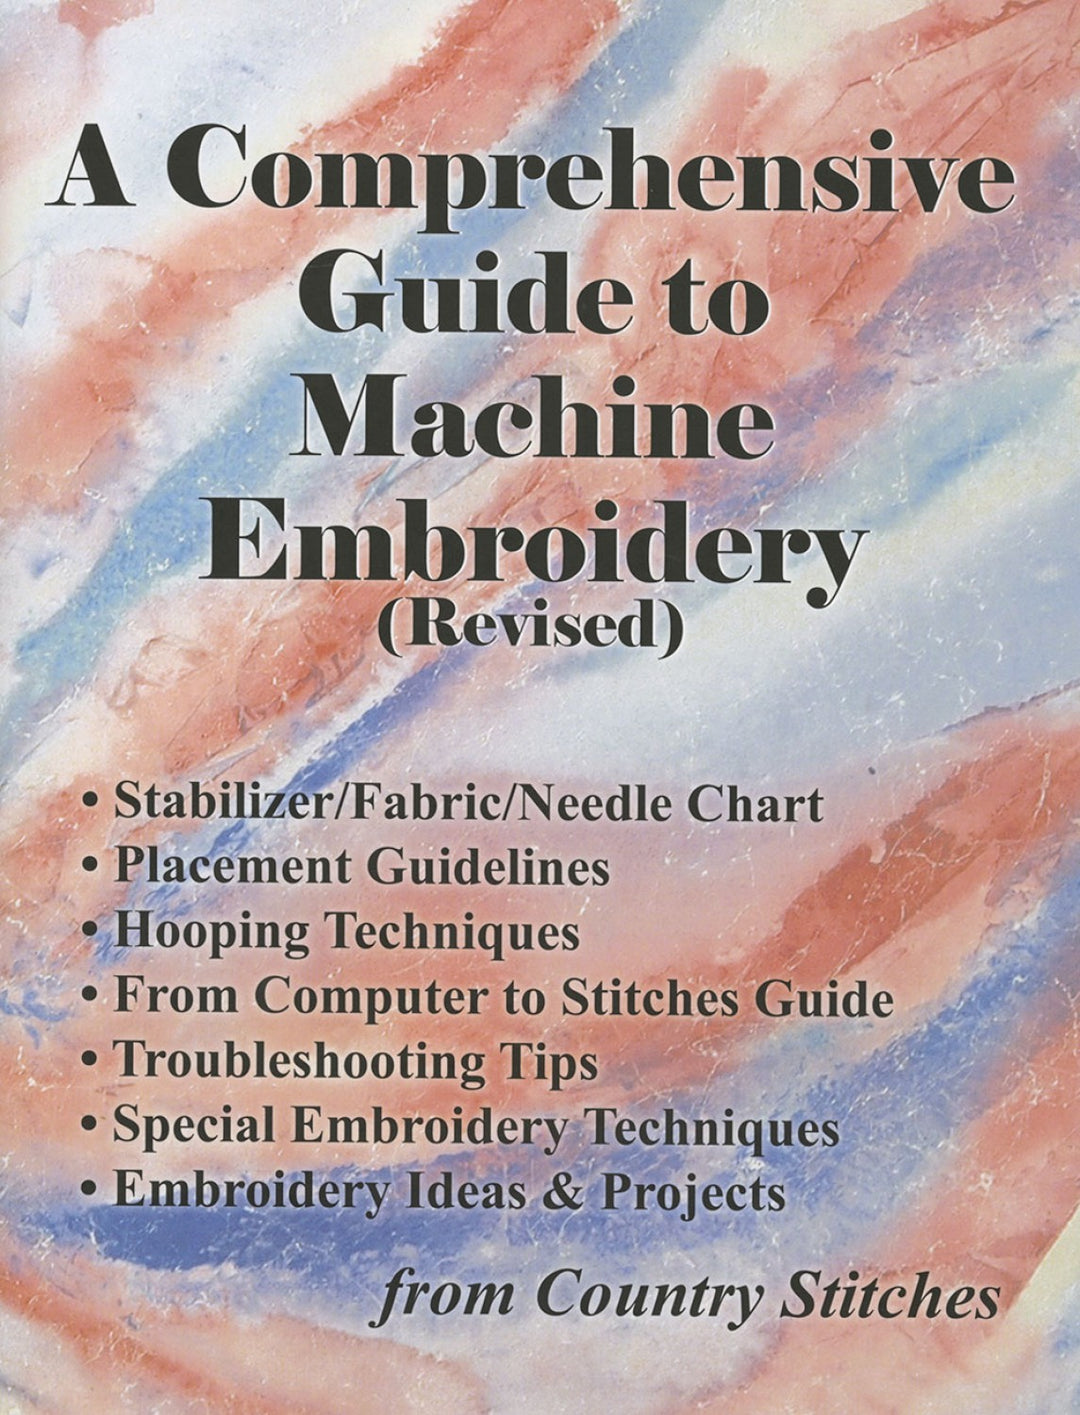 A Comprehensive Guide to Machine Embroidery Revised (Softcover) by Country Stitches (5040152969261)